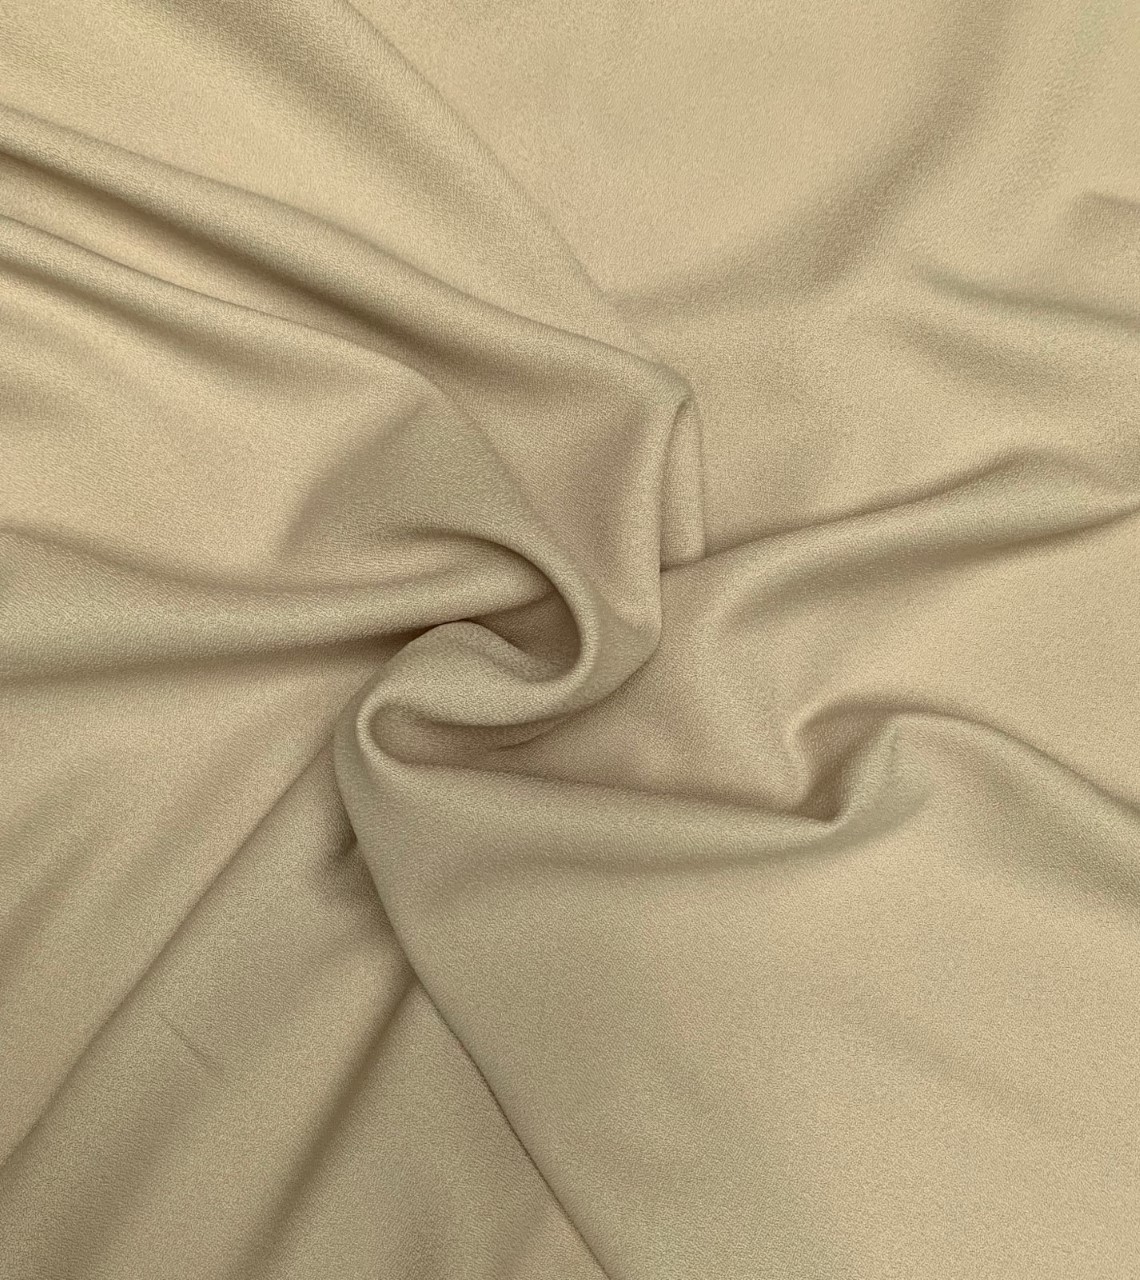 Khaki Crepe Fabric 60" By the yard (100% polyester) - Click Image to Close